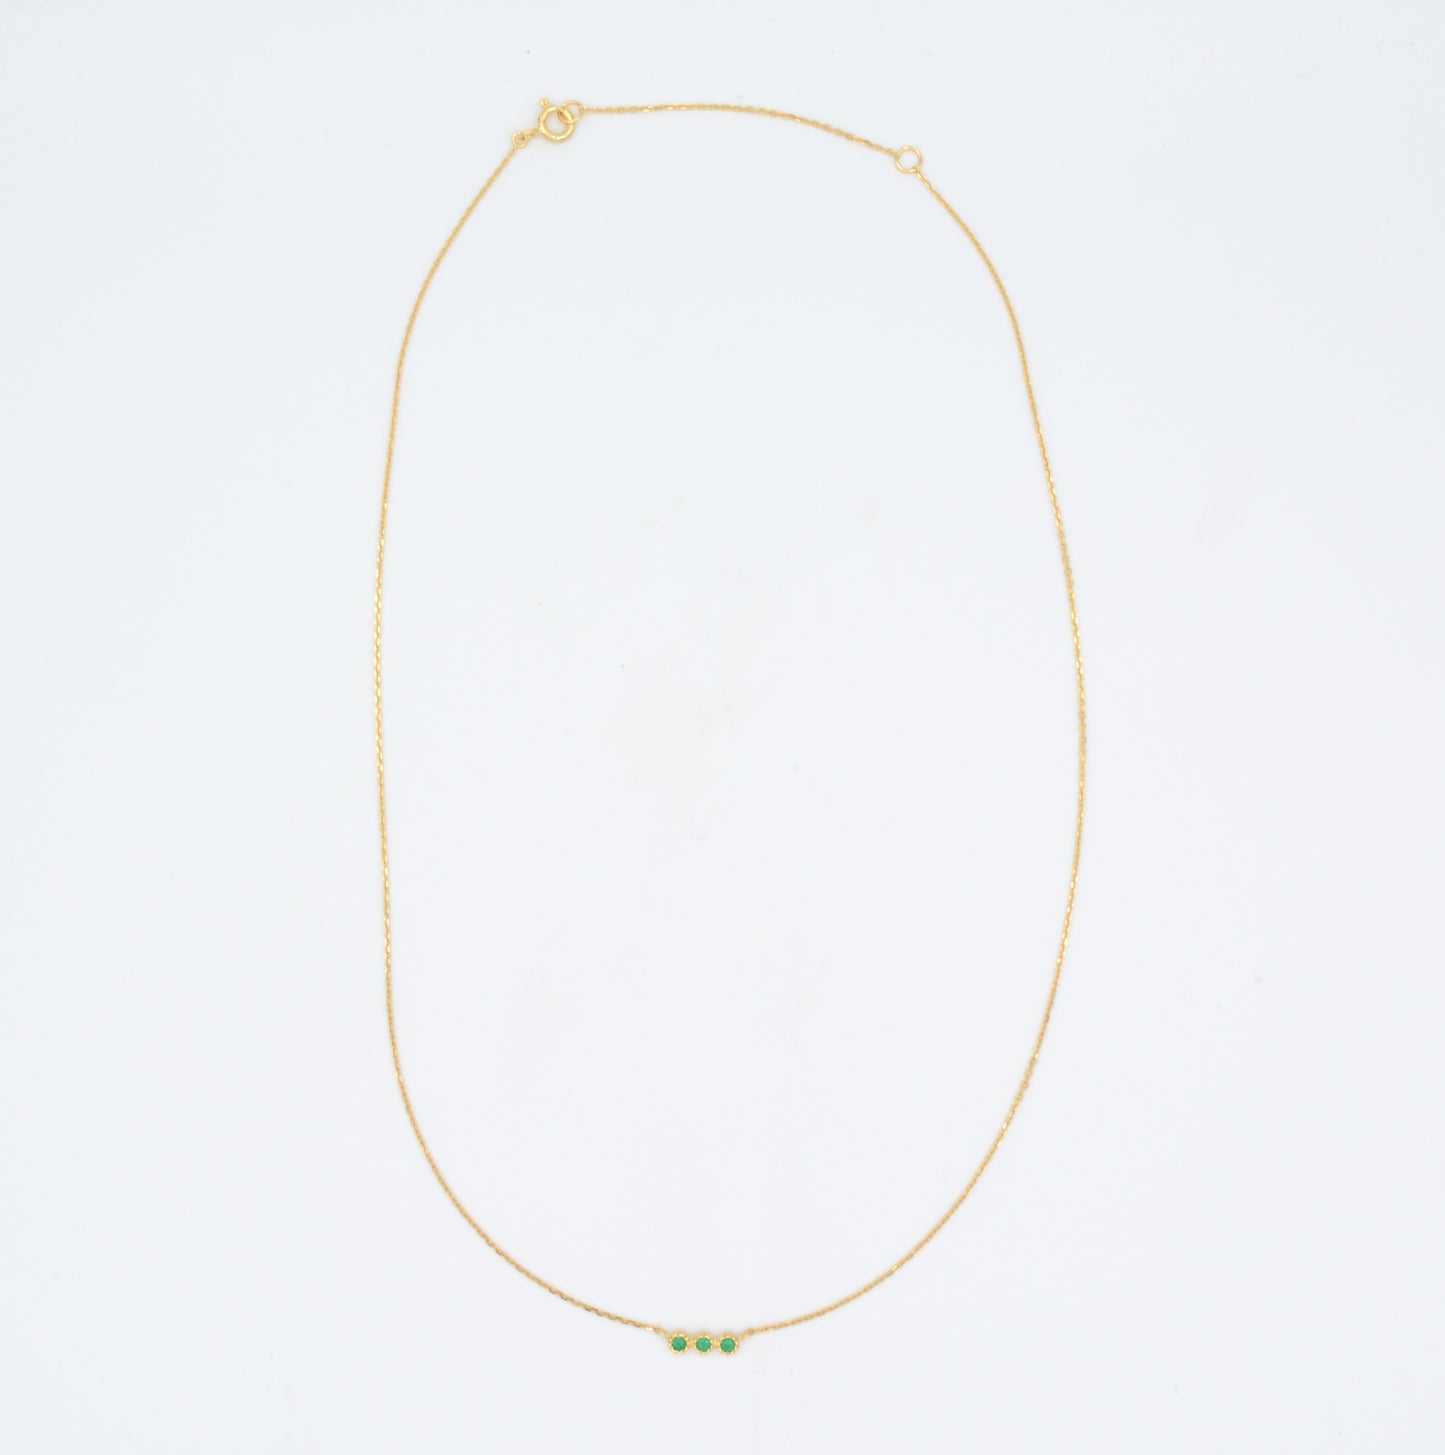 Green onyx delicate bar necklace